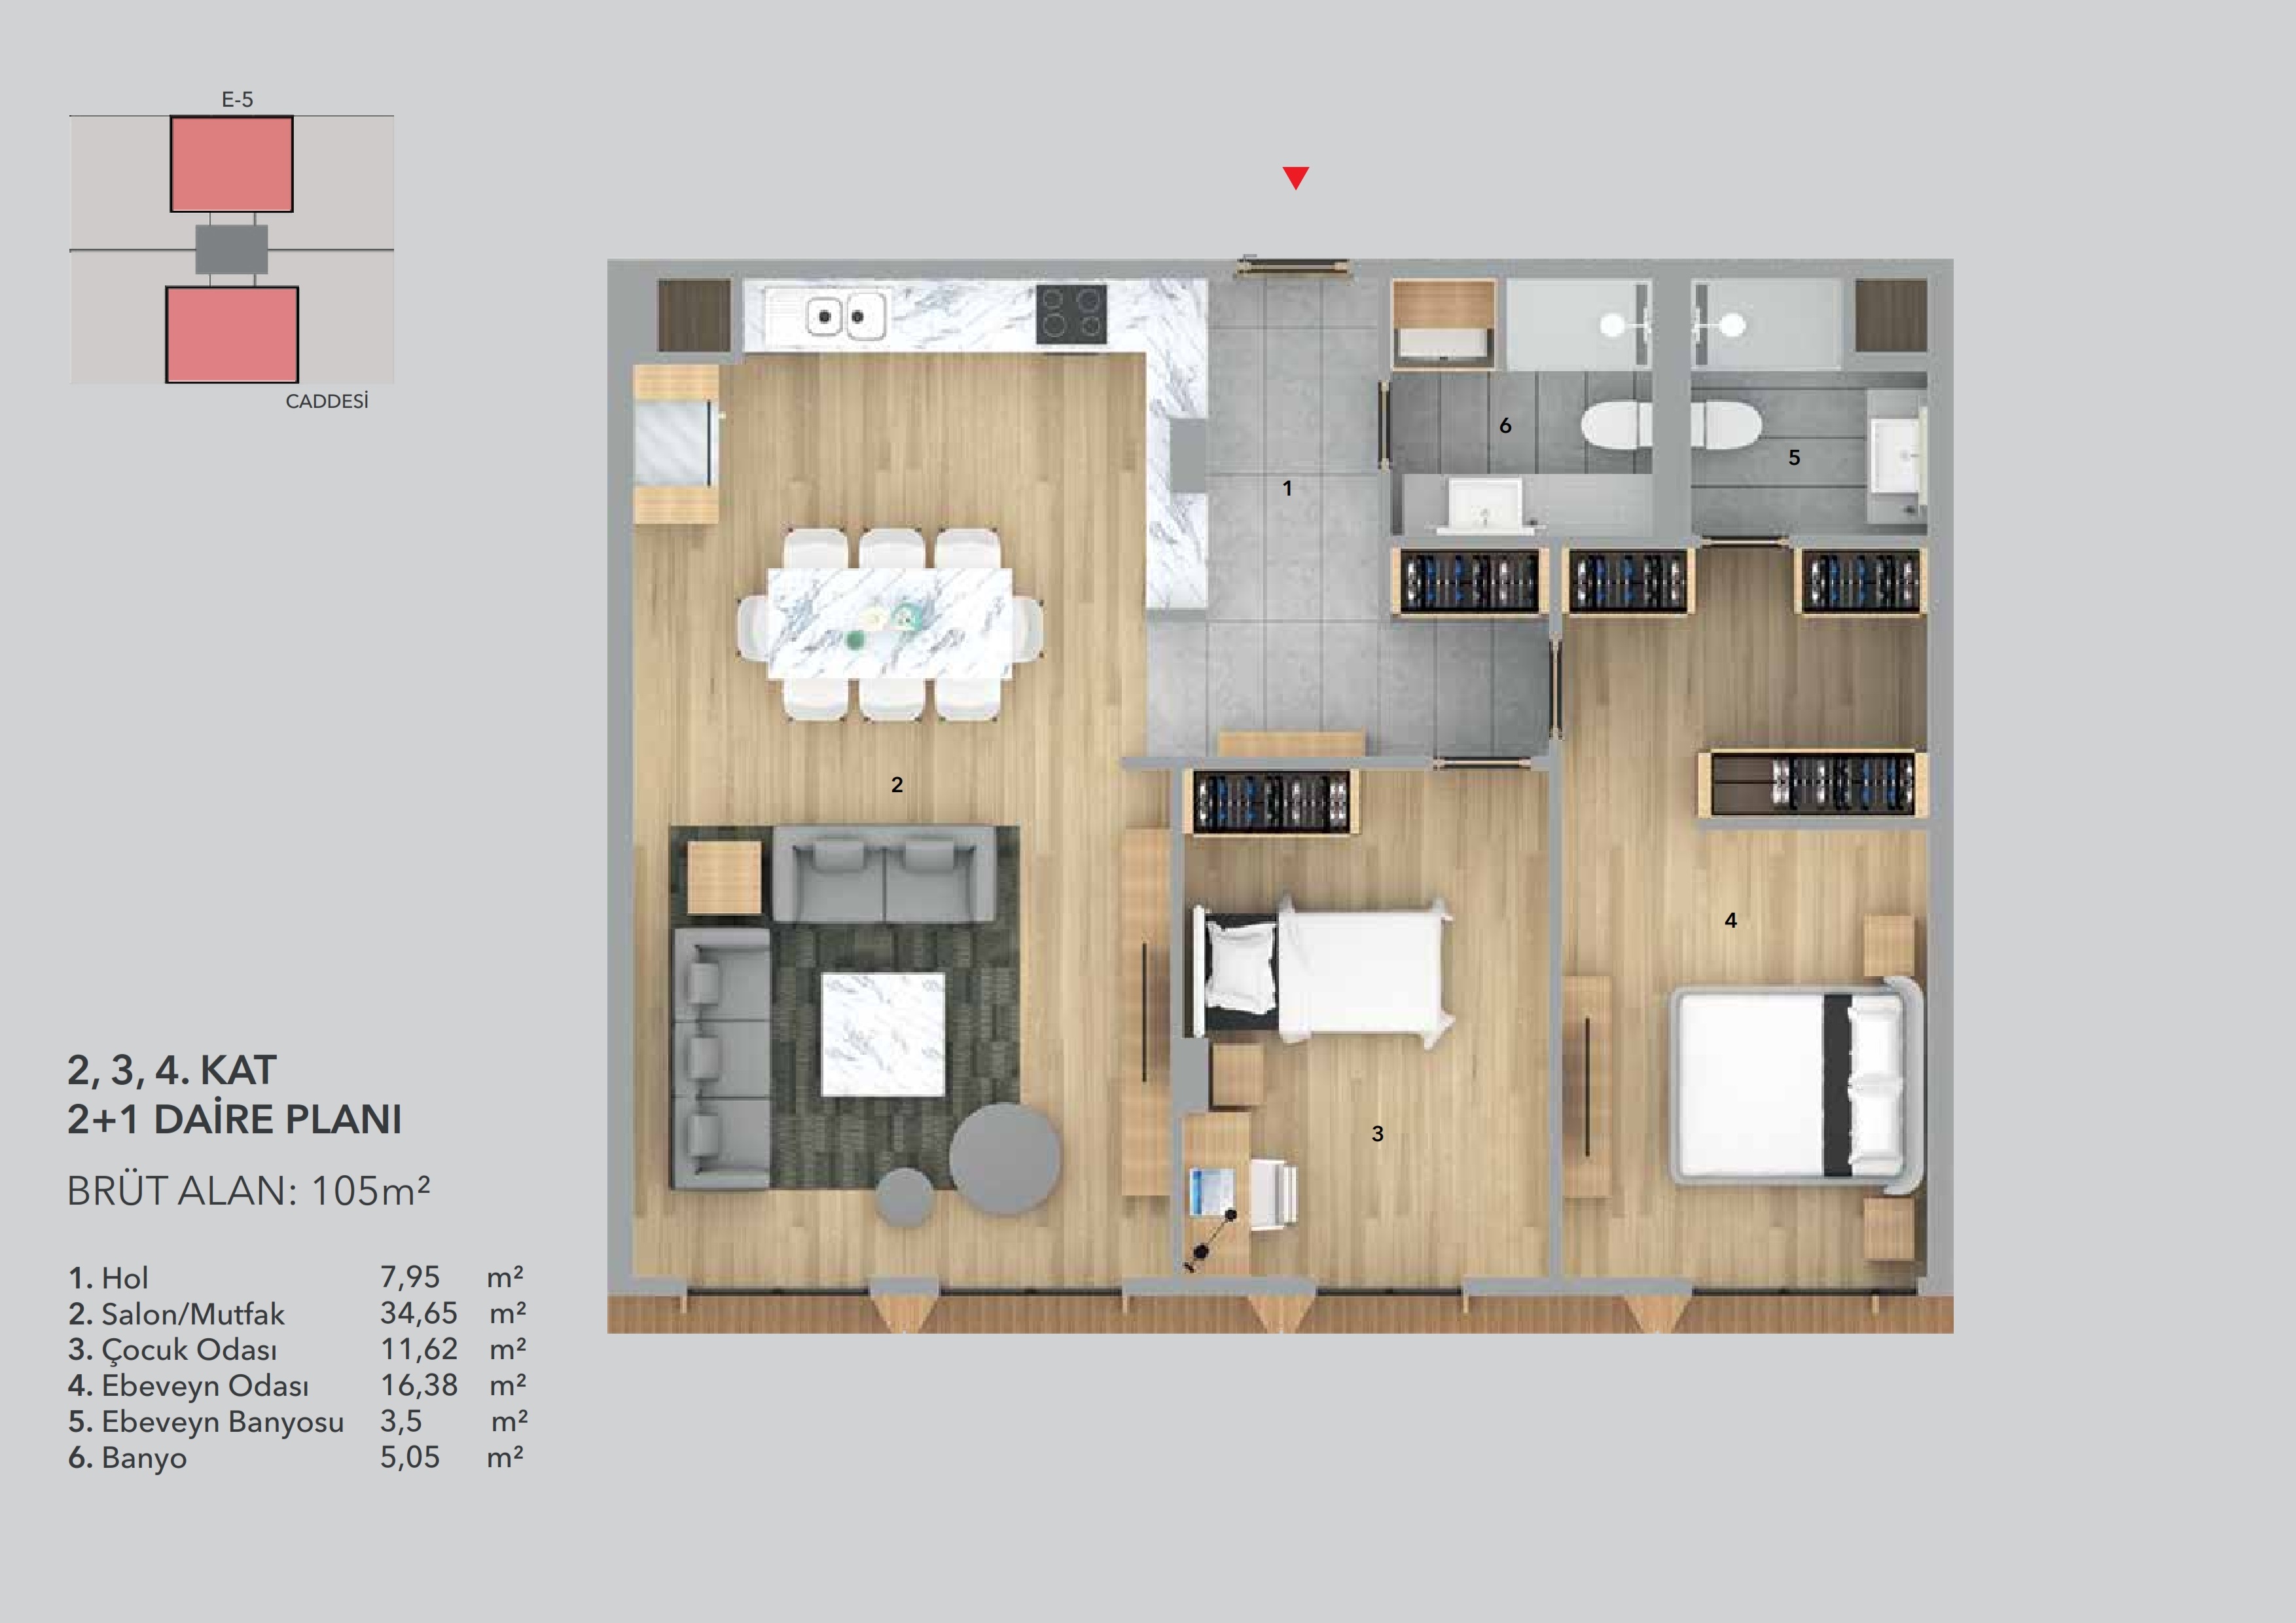 TWO-BEDROOM 105 m2